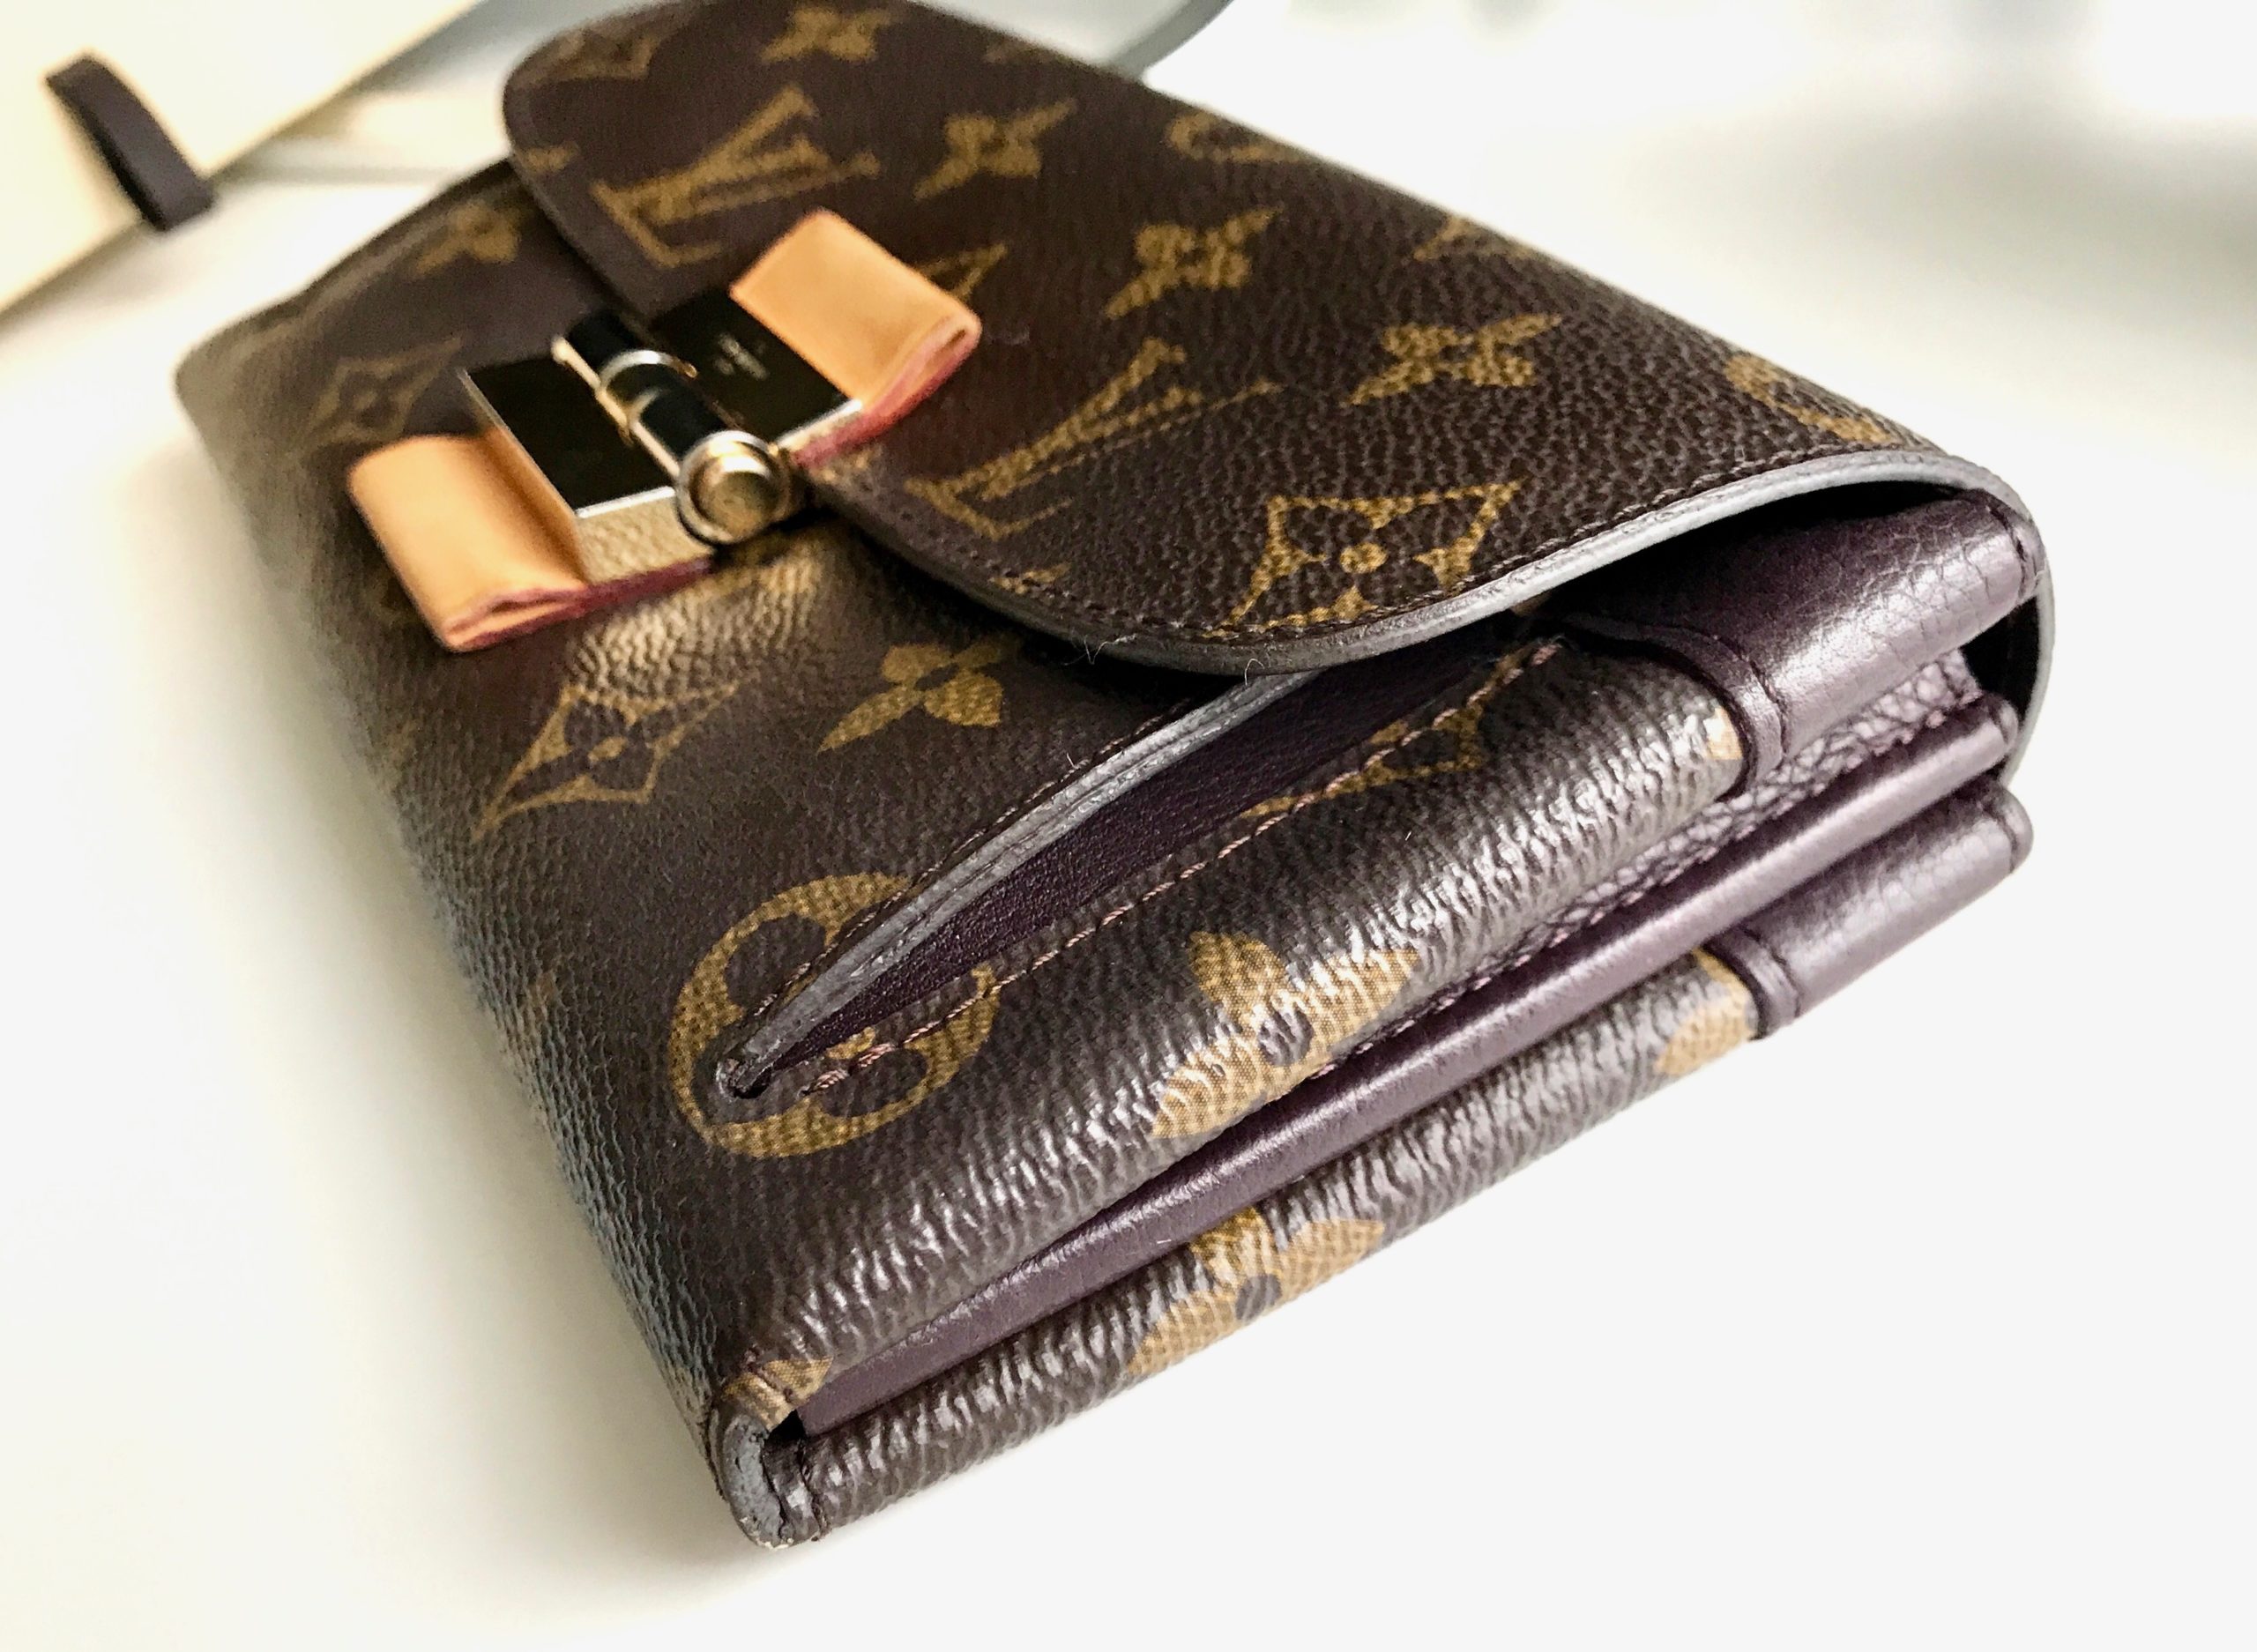 Louis Vuitton Elysee Wallet Monogram Canvas and Leather Brown 458129